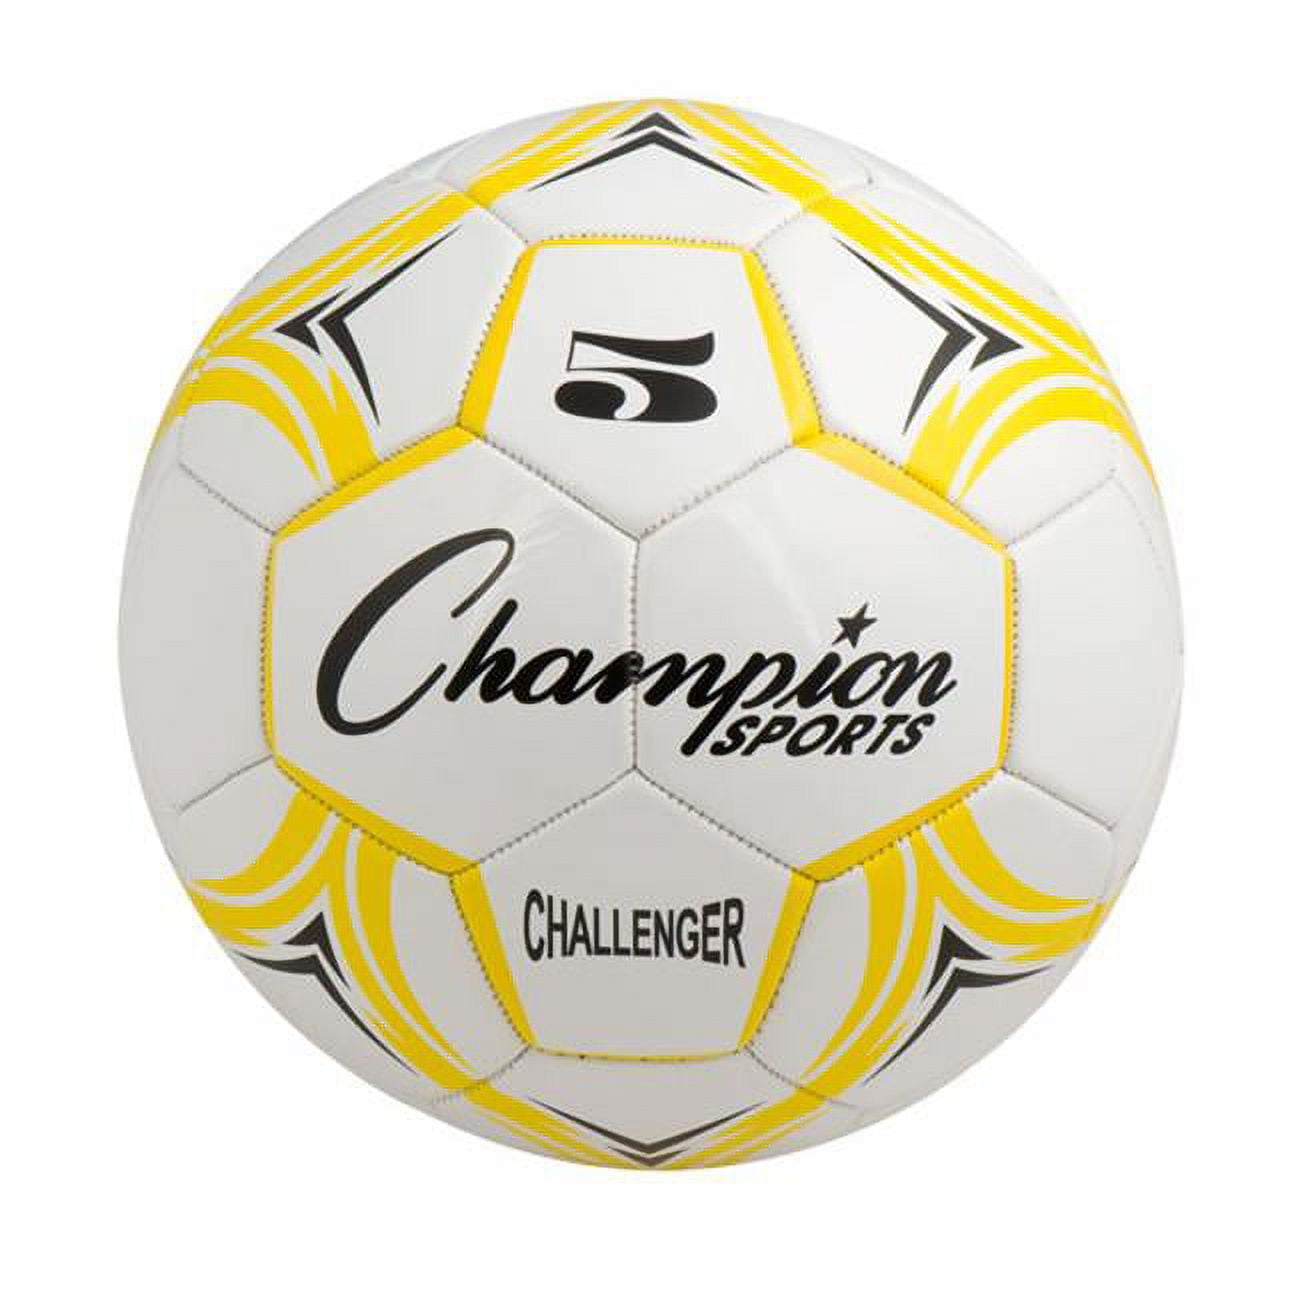 Picture of Champion Sports CH5YL Challenger Series Soccer Ball, Yellow & White - Size 5